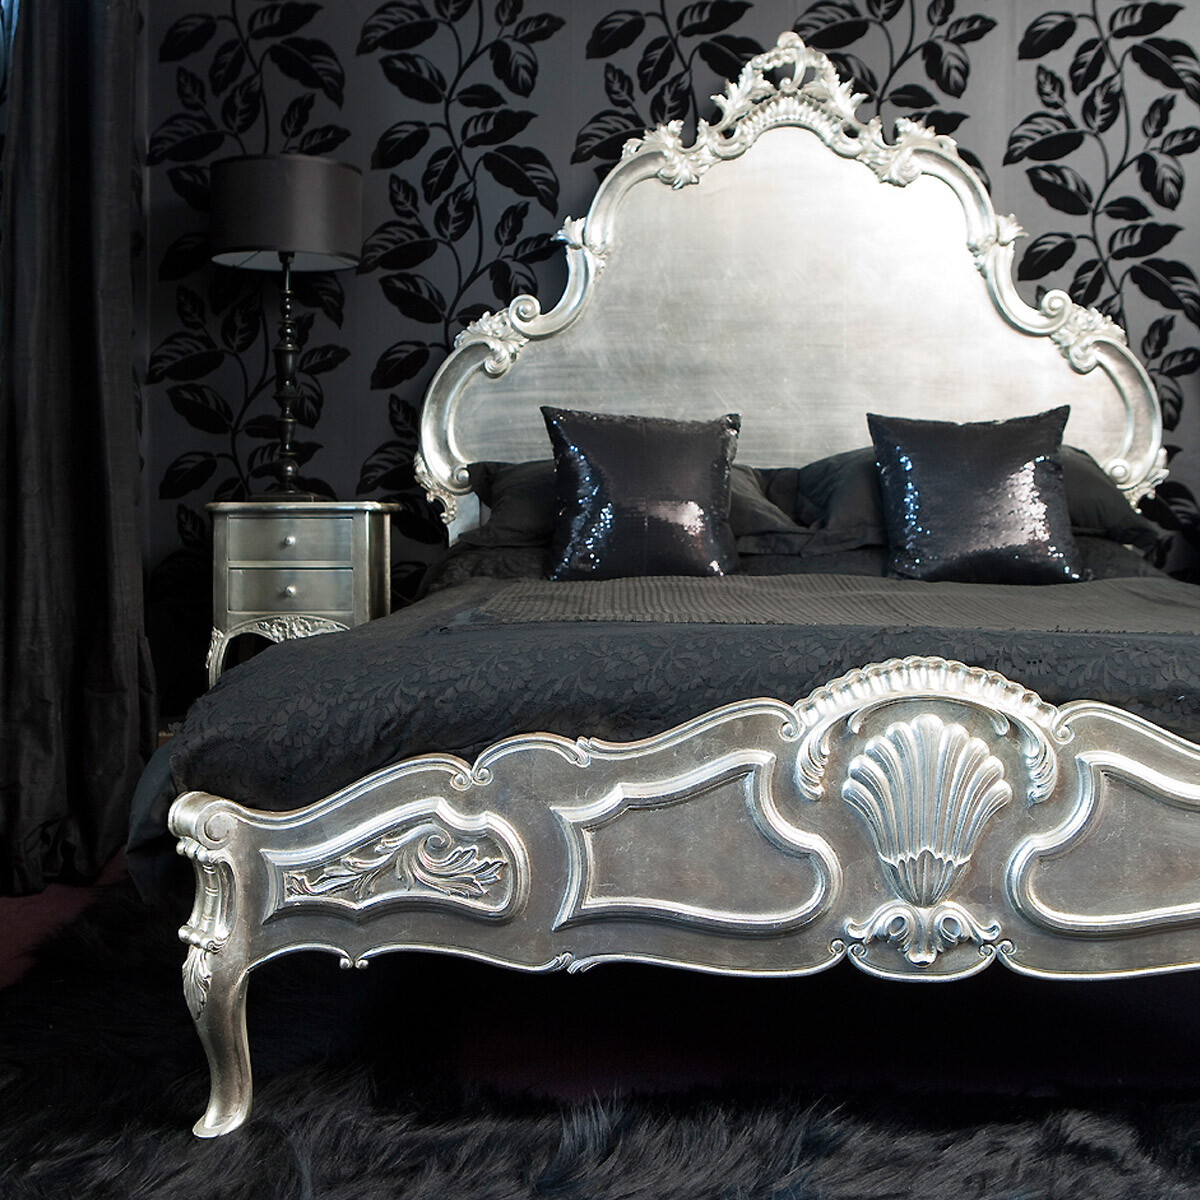 French beds - Sylvia Silver Luxury bed 1 - The French Bedroom Company- www.homeworlddesign.com